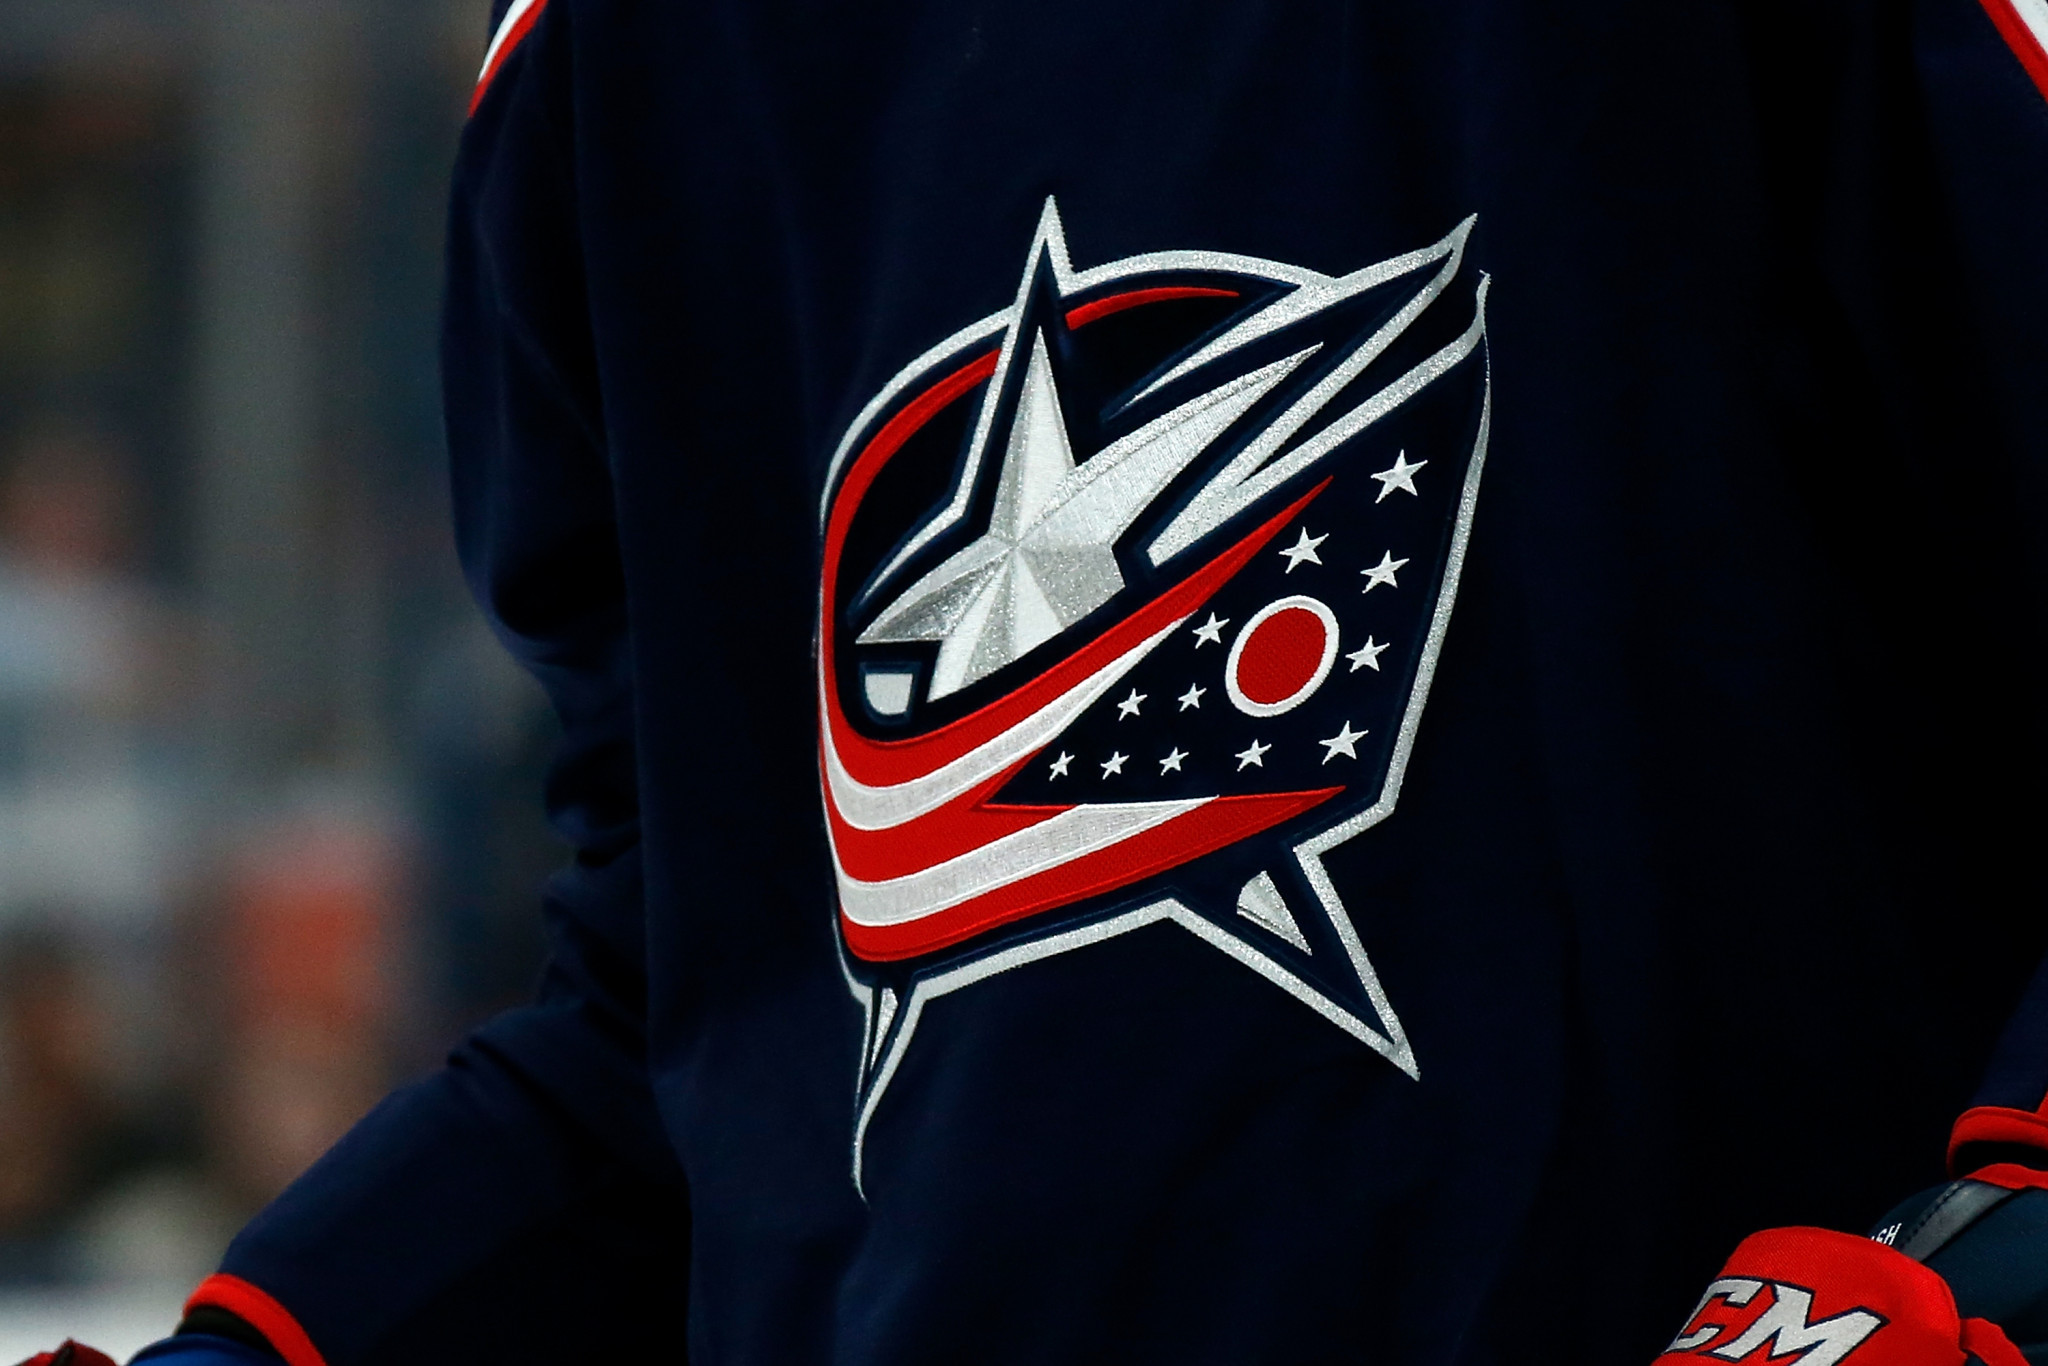 A group from the Jordanian Taekwondo Federation watched the Columbus Blue Jackets ©Getty Images